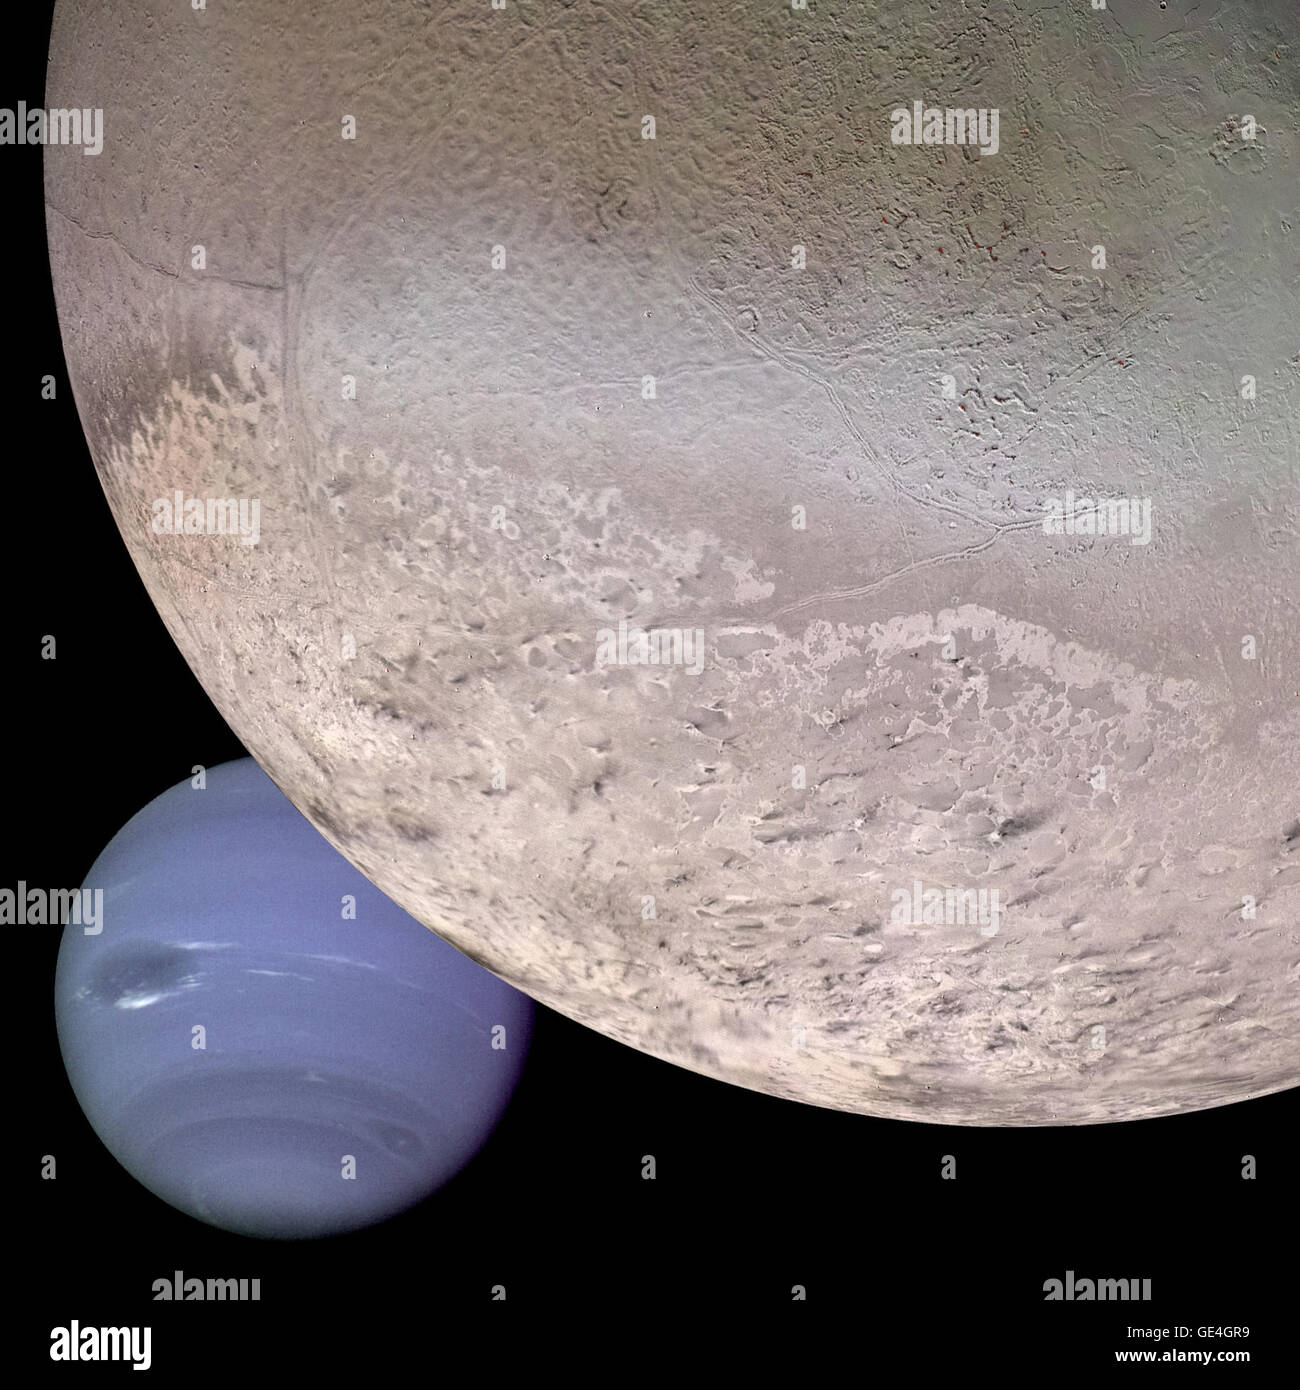 This computer generated montage shows Neptune as it would appear from a spacecraft approaching Triton, Neptune's largest moon at 2706 km (1683 mi) in diameter. The wind and sublimation eroded south polar cap of Triton is shown at the bottom of the Triton image, a cryovolcanic terrain at the upper right, and the enigmatic &quot;cantaloupe terrain&quot; at the upper left. Triton's surface is mostly covered by nitrogen frost mixed with traces of condensed methane, carbon dioxide, and carbon monoxide. The tenuous atmosphere of Triton, though only about one hundredth of one percent of Earth's atmos Stock Photo